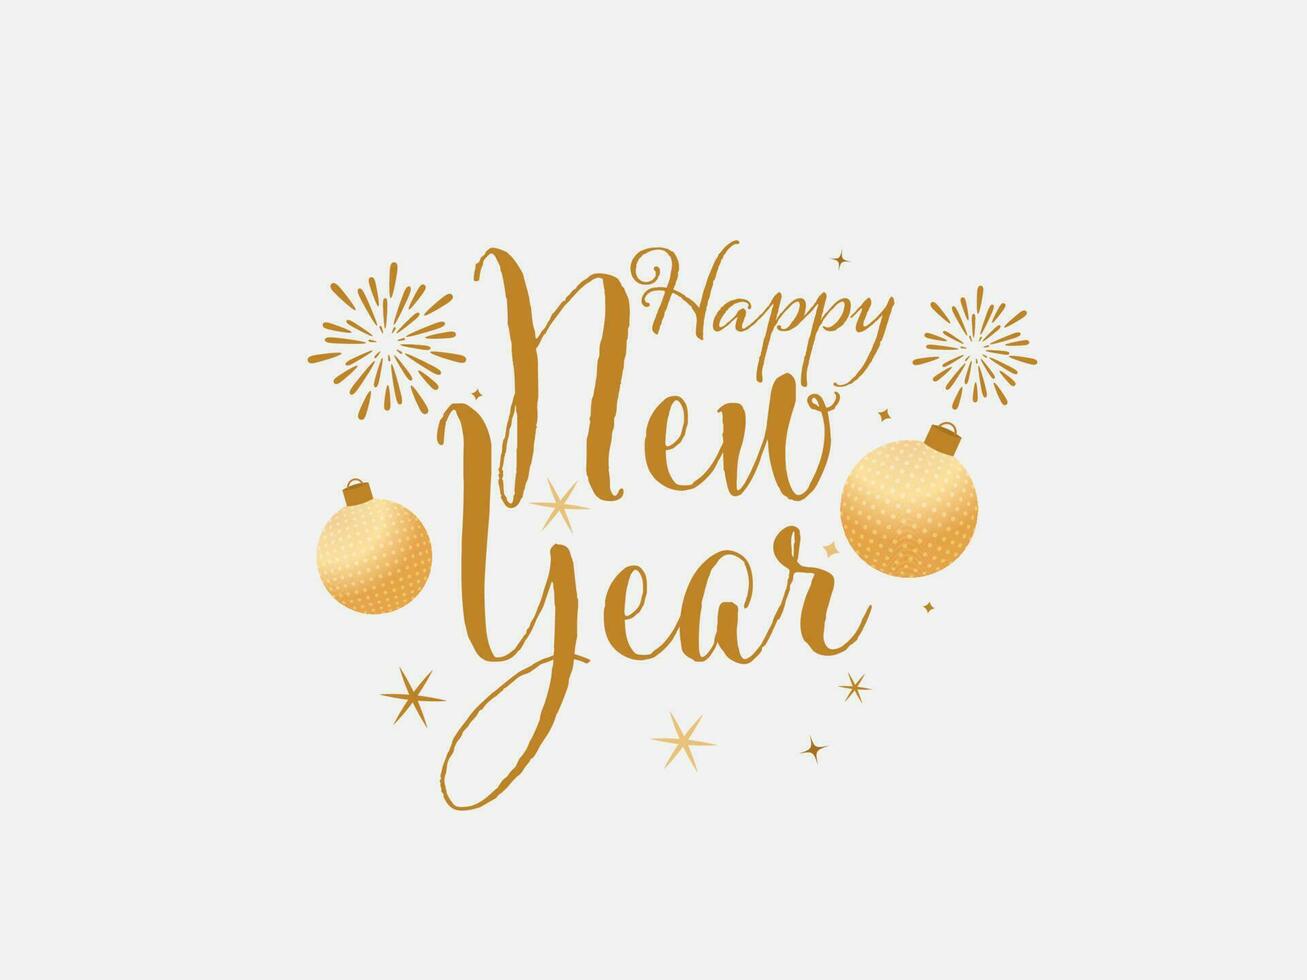 Happy New Year Calligraphy With Golden Baubles And Fireworks On White Background. vector